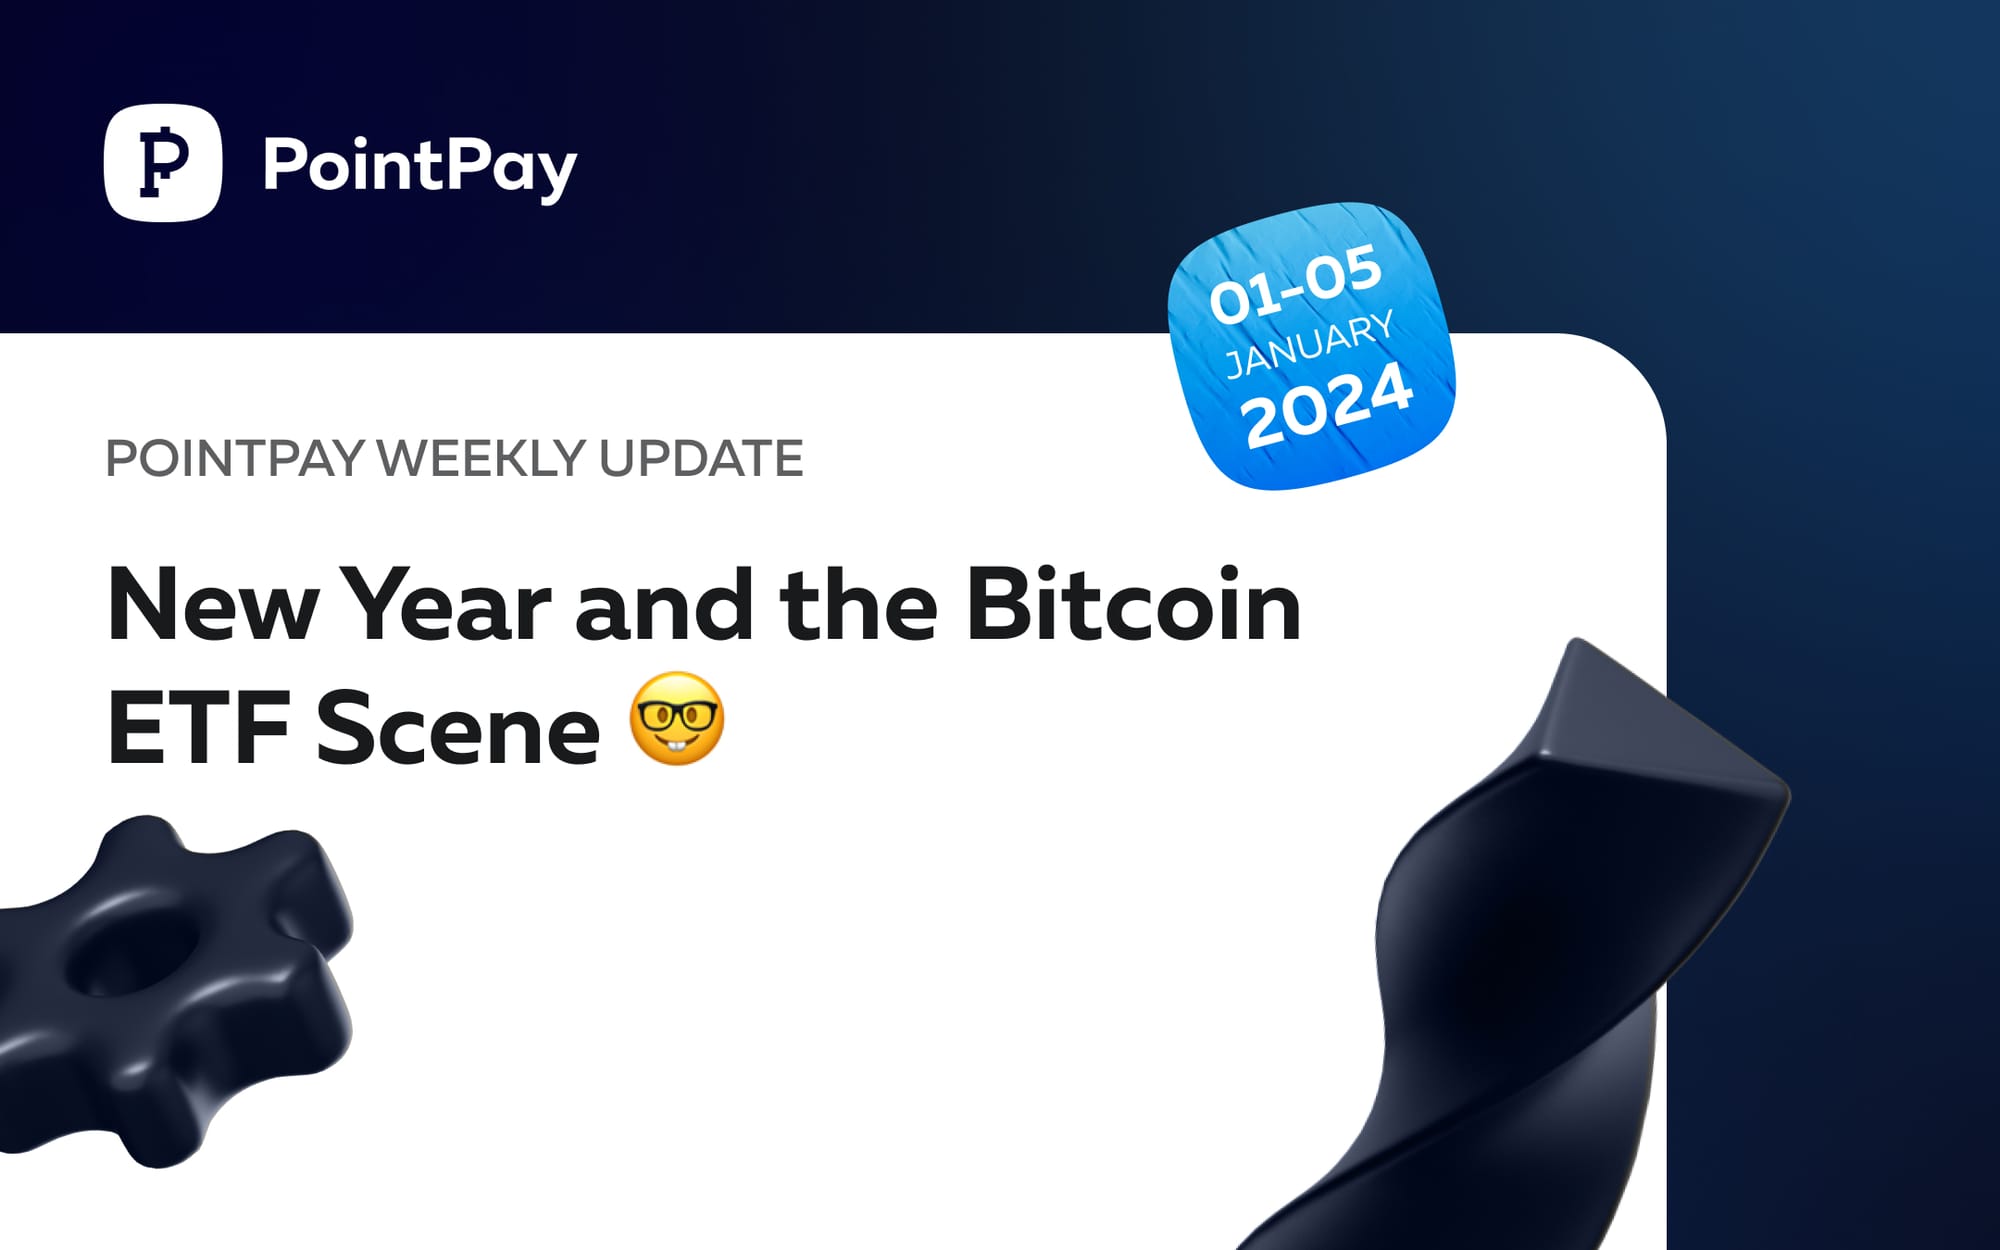 PointPay Weekly Update (01-05 January, 2024)